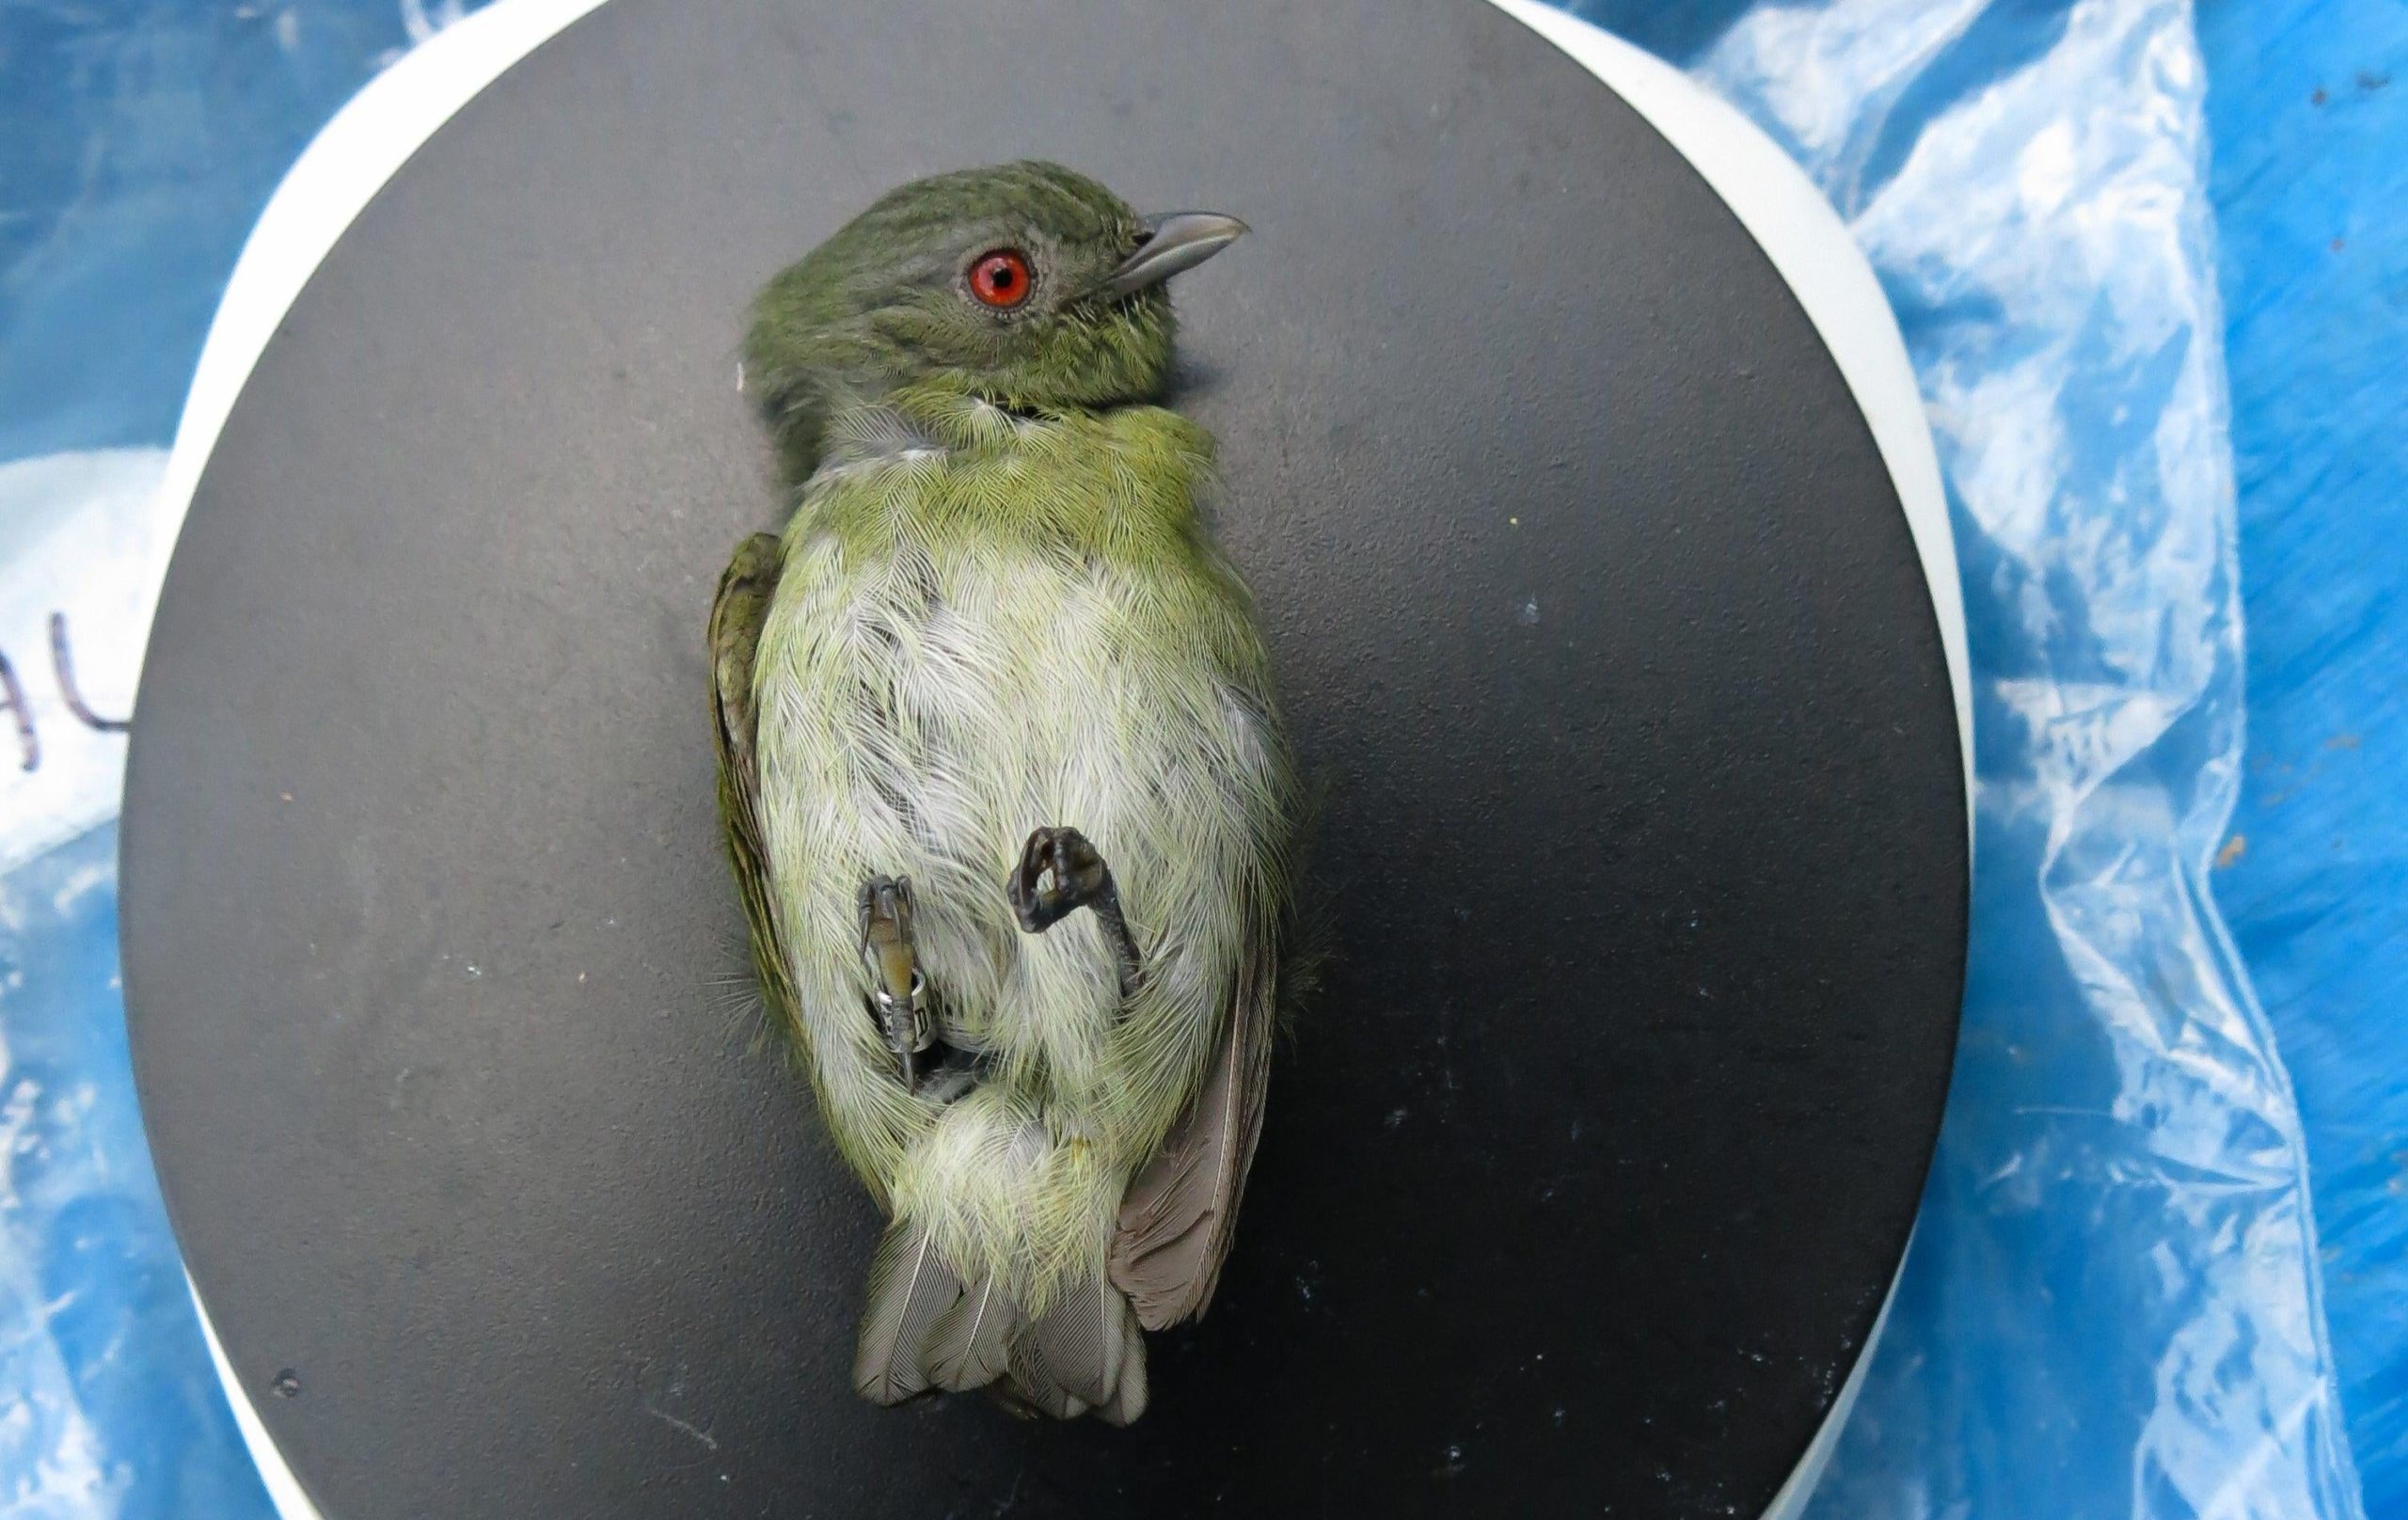 A white-crowned Manakin (Pseudopipra pipra) is weighed as part of the team's work. (Photo: Cameron Rutt)